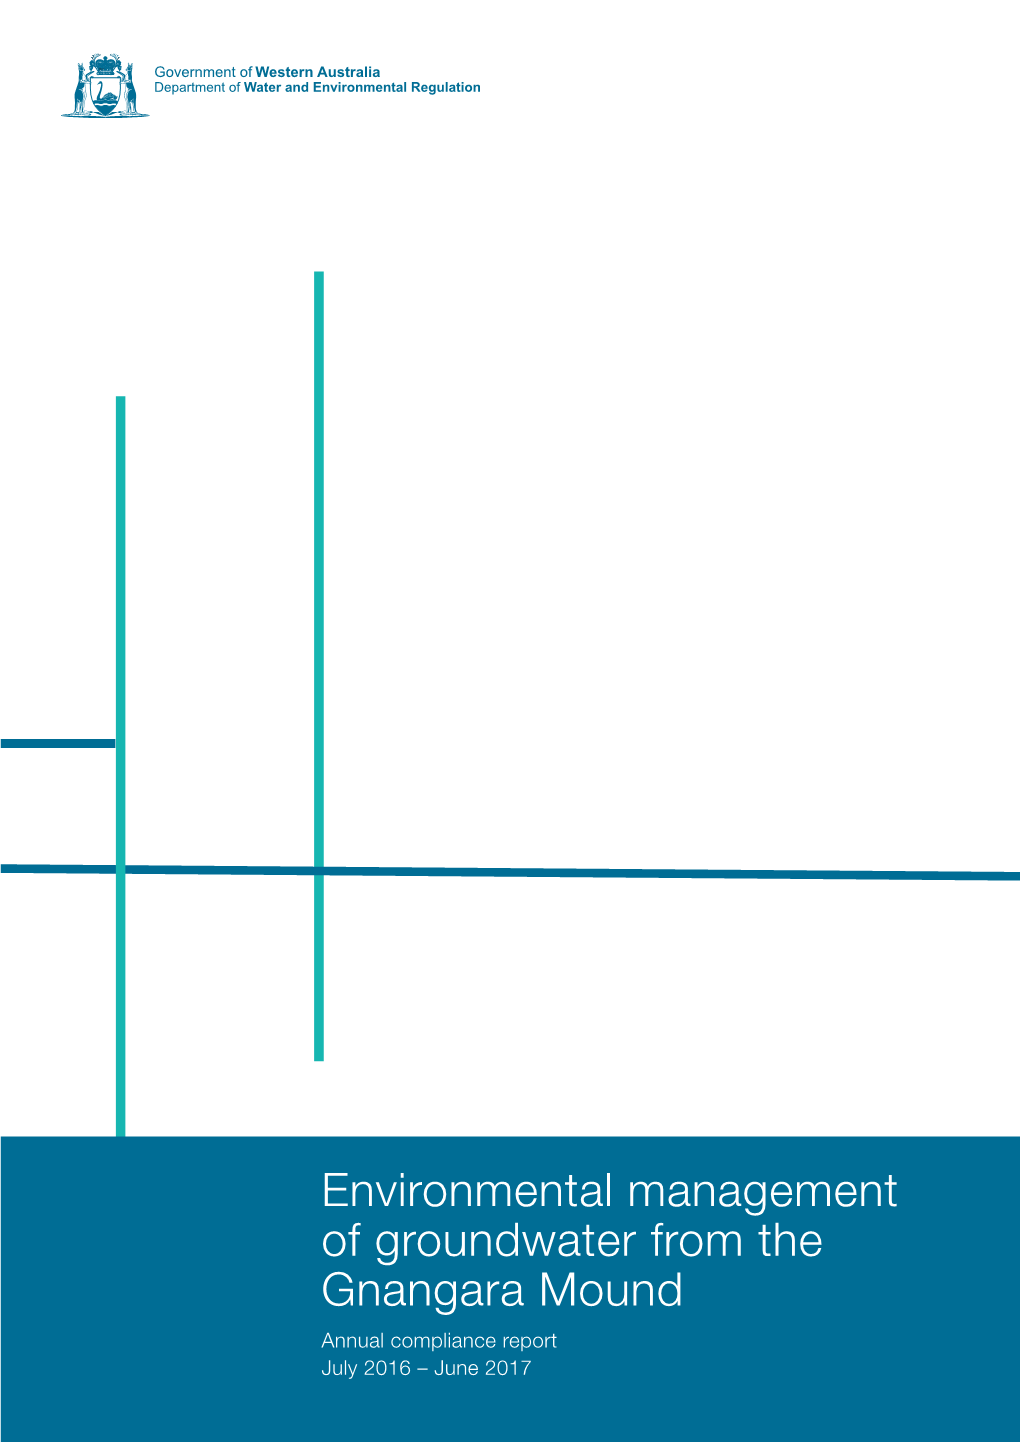 Environmental Management of Groundwater from the Gnangara Mound Annual Compliance Report July 2016 – June 2017